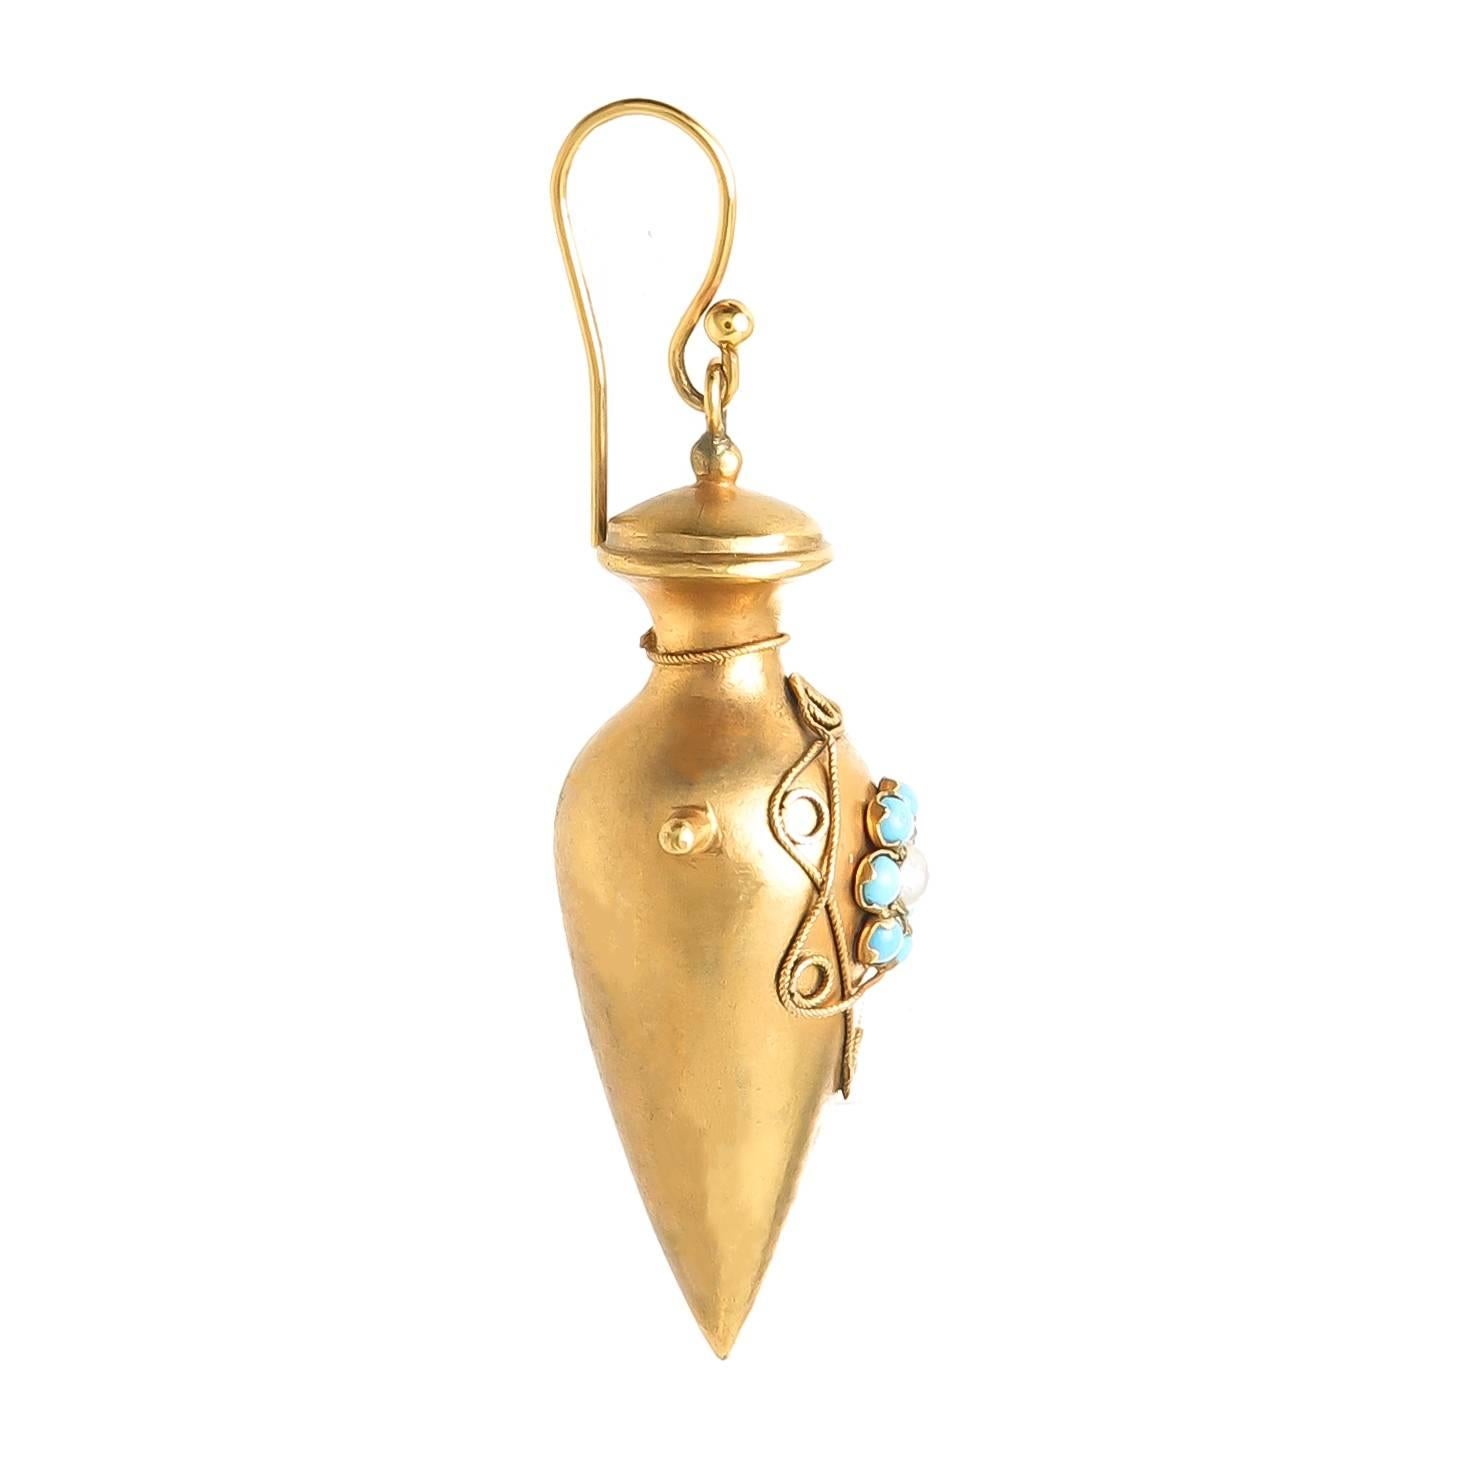 Circa 1870s 9K Yellow Gold Urn form earrings, having a Classical Etruscan design with fine granulation work and set with Turquoise and Pearls. Measuring 1 3/8 inch in length and 1/2 inch in diameter. All original and in excellent condition. 